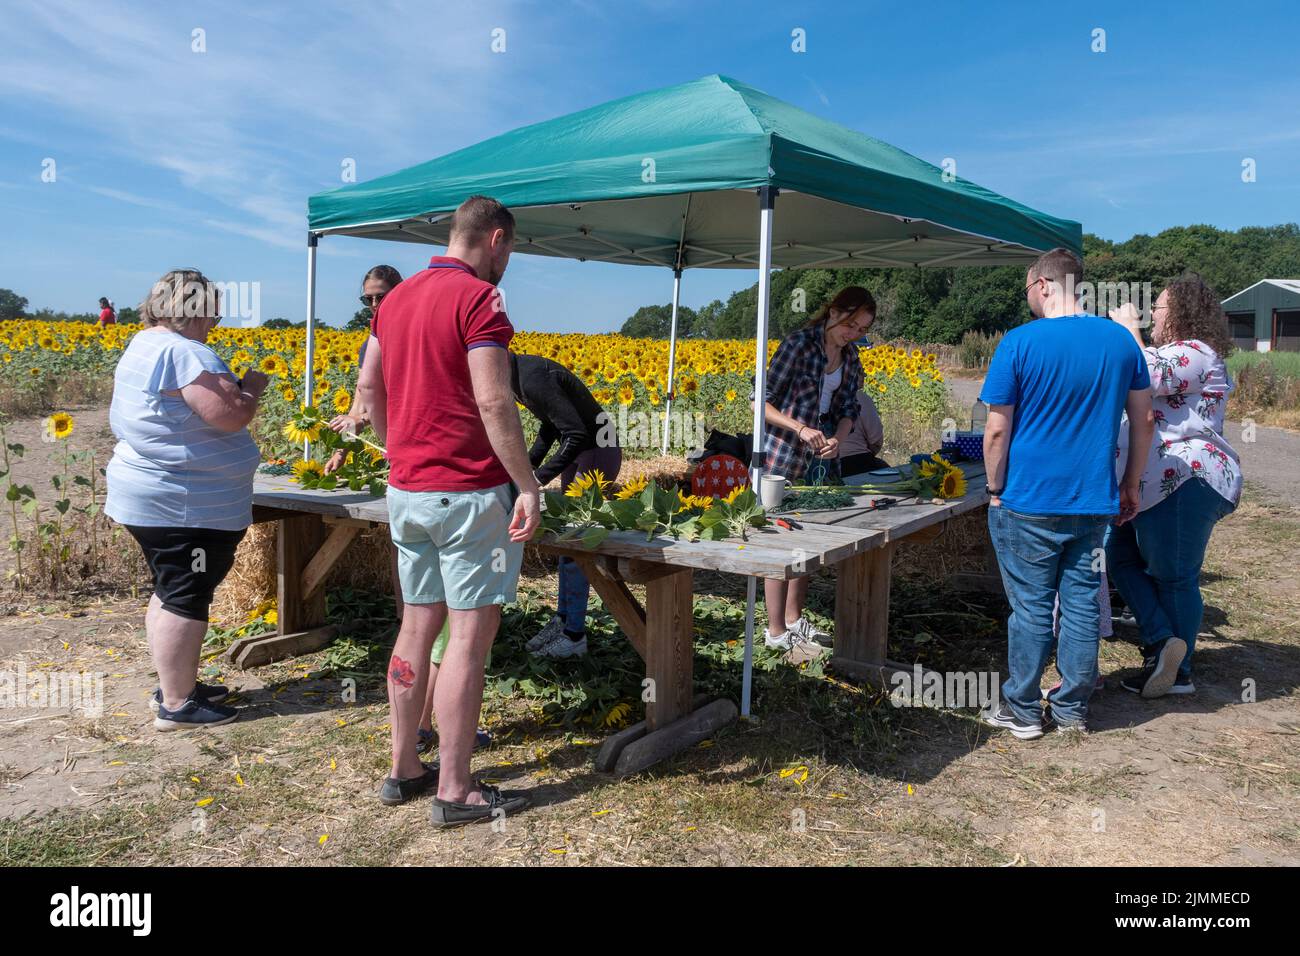 People picking and buying sunflowers at a sunflower field, Hampshire, England, UK, during summer. Stock Photo